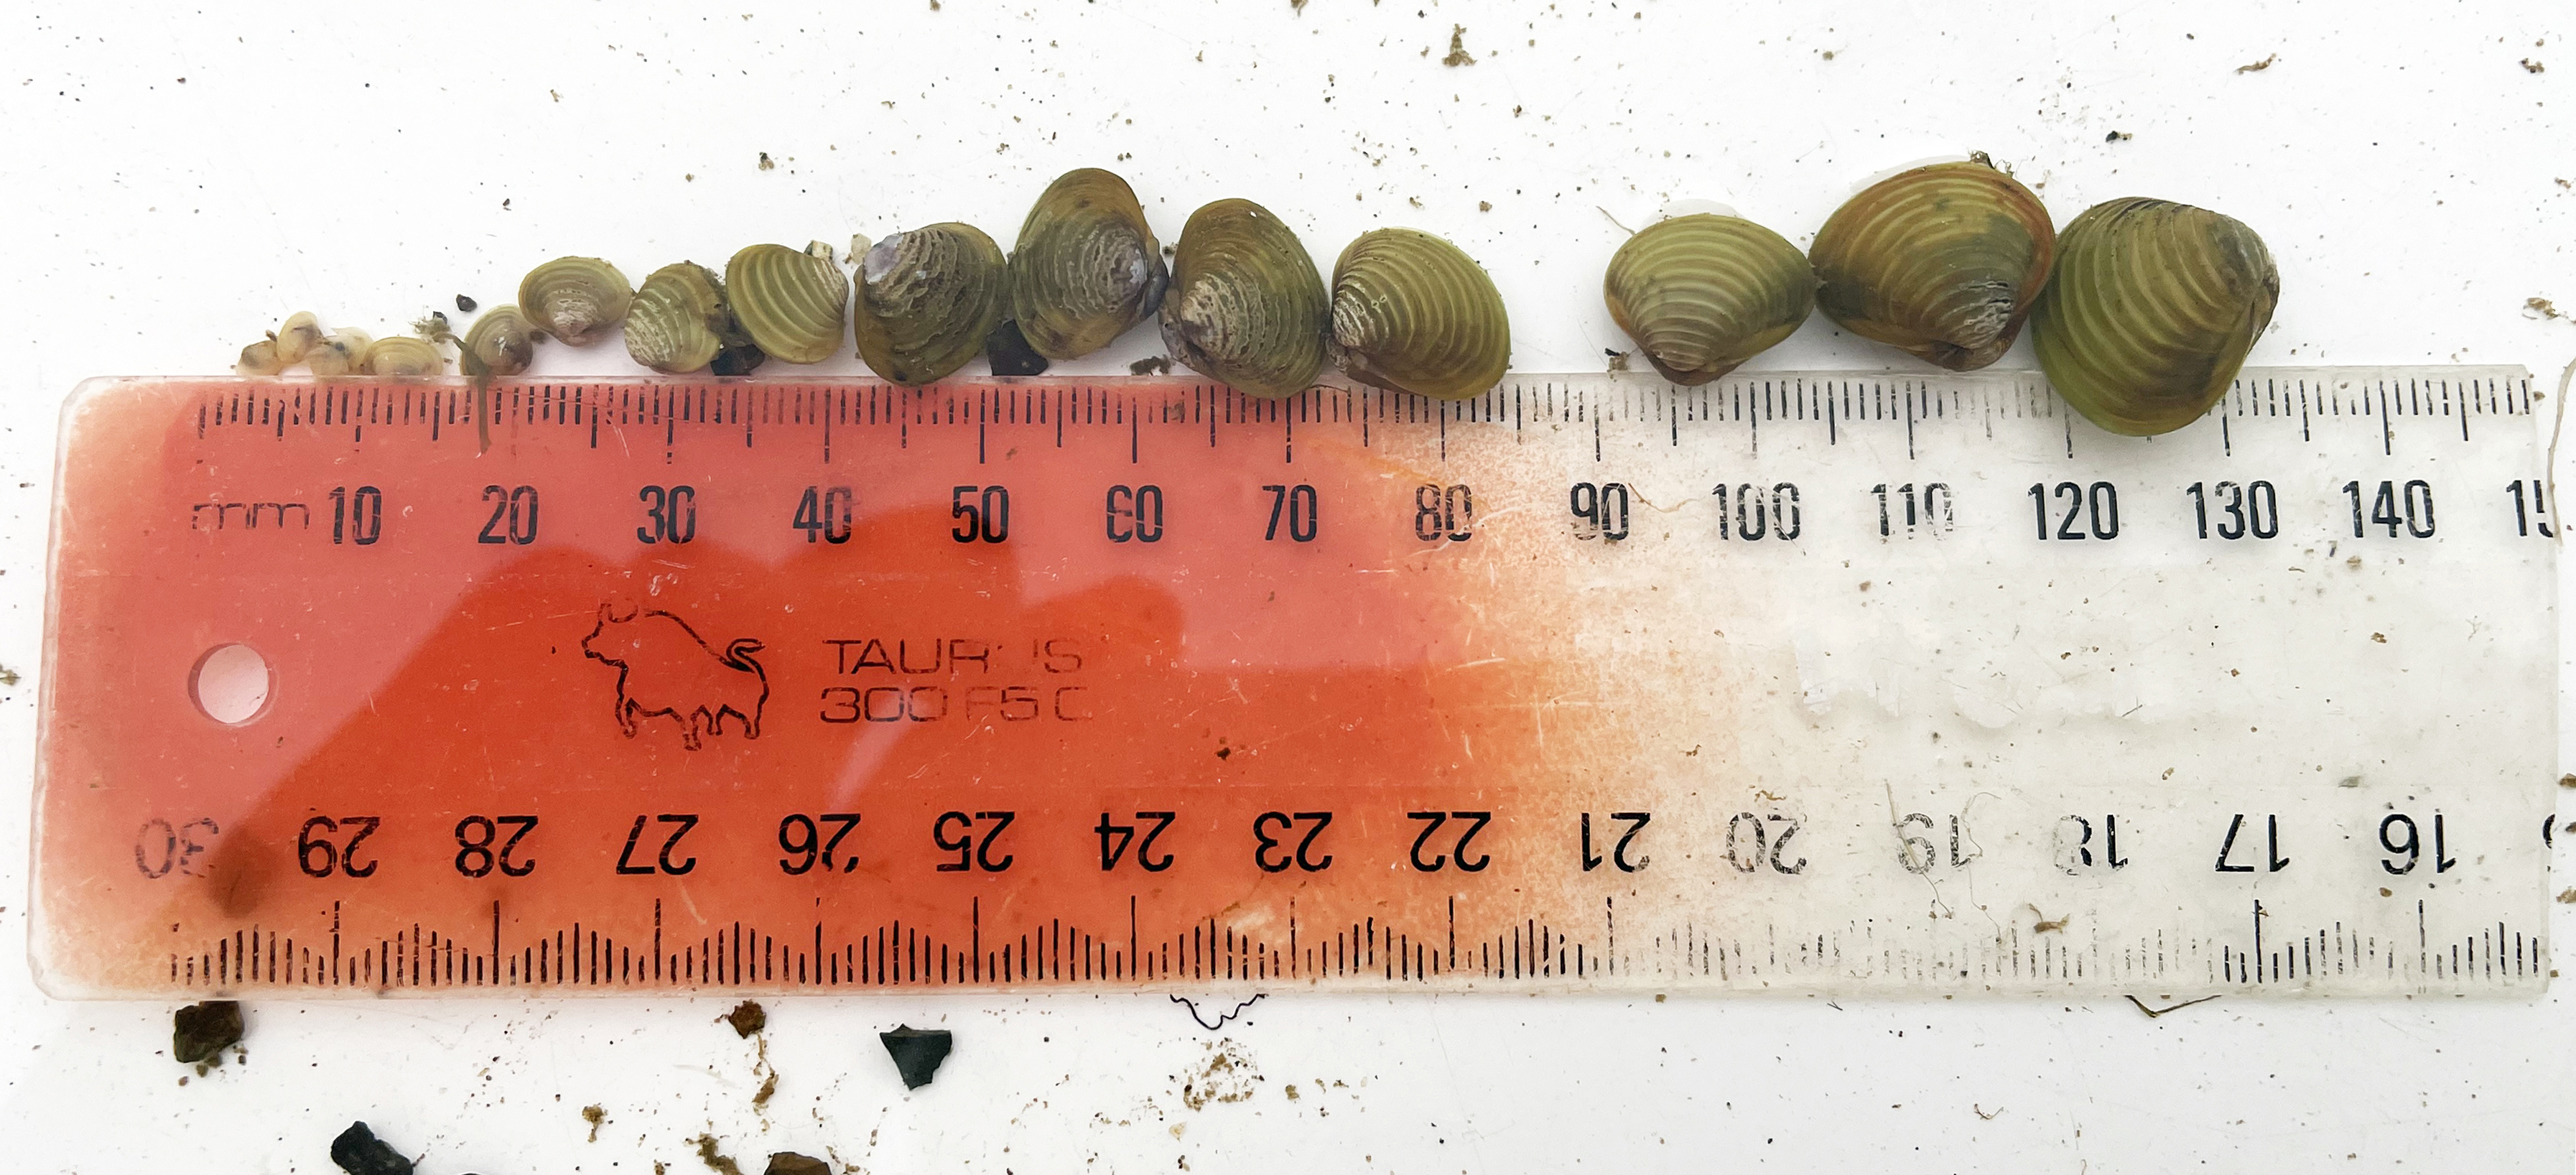 Clams of various sizes lined up against a ruler from smallest to biggest.